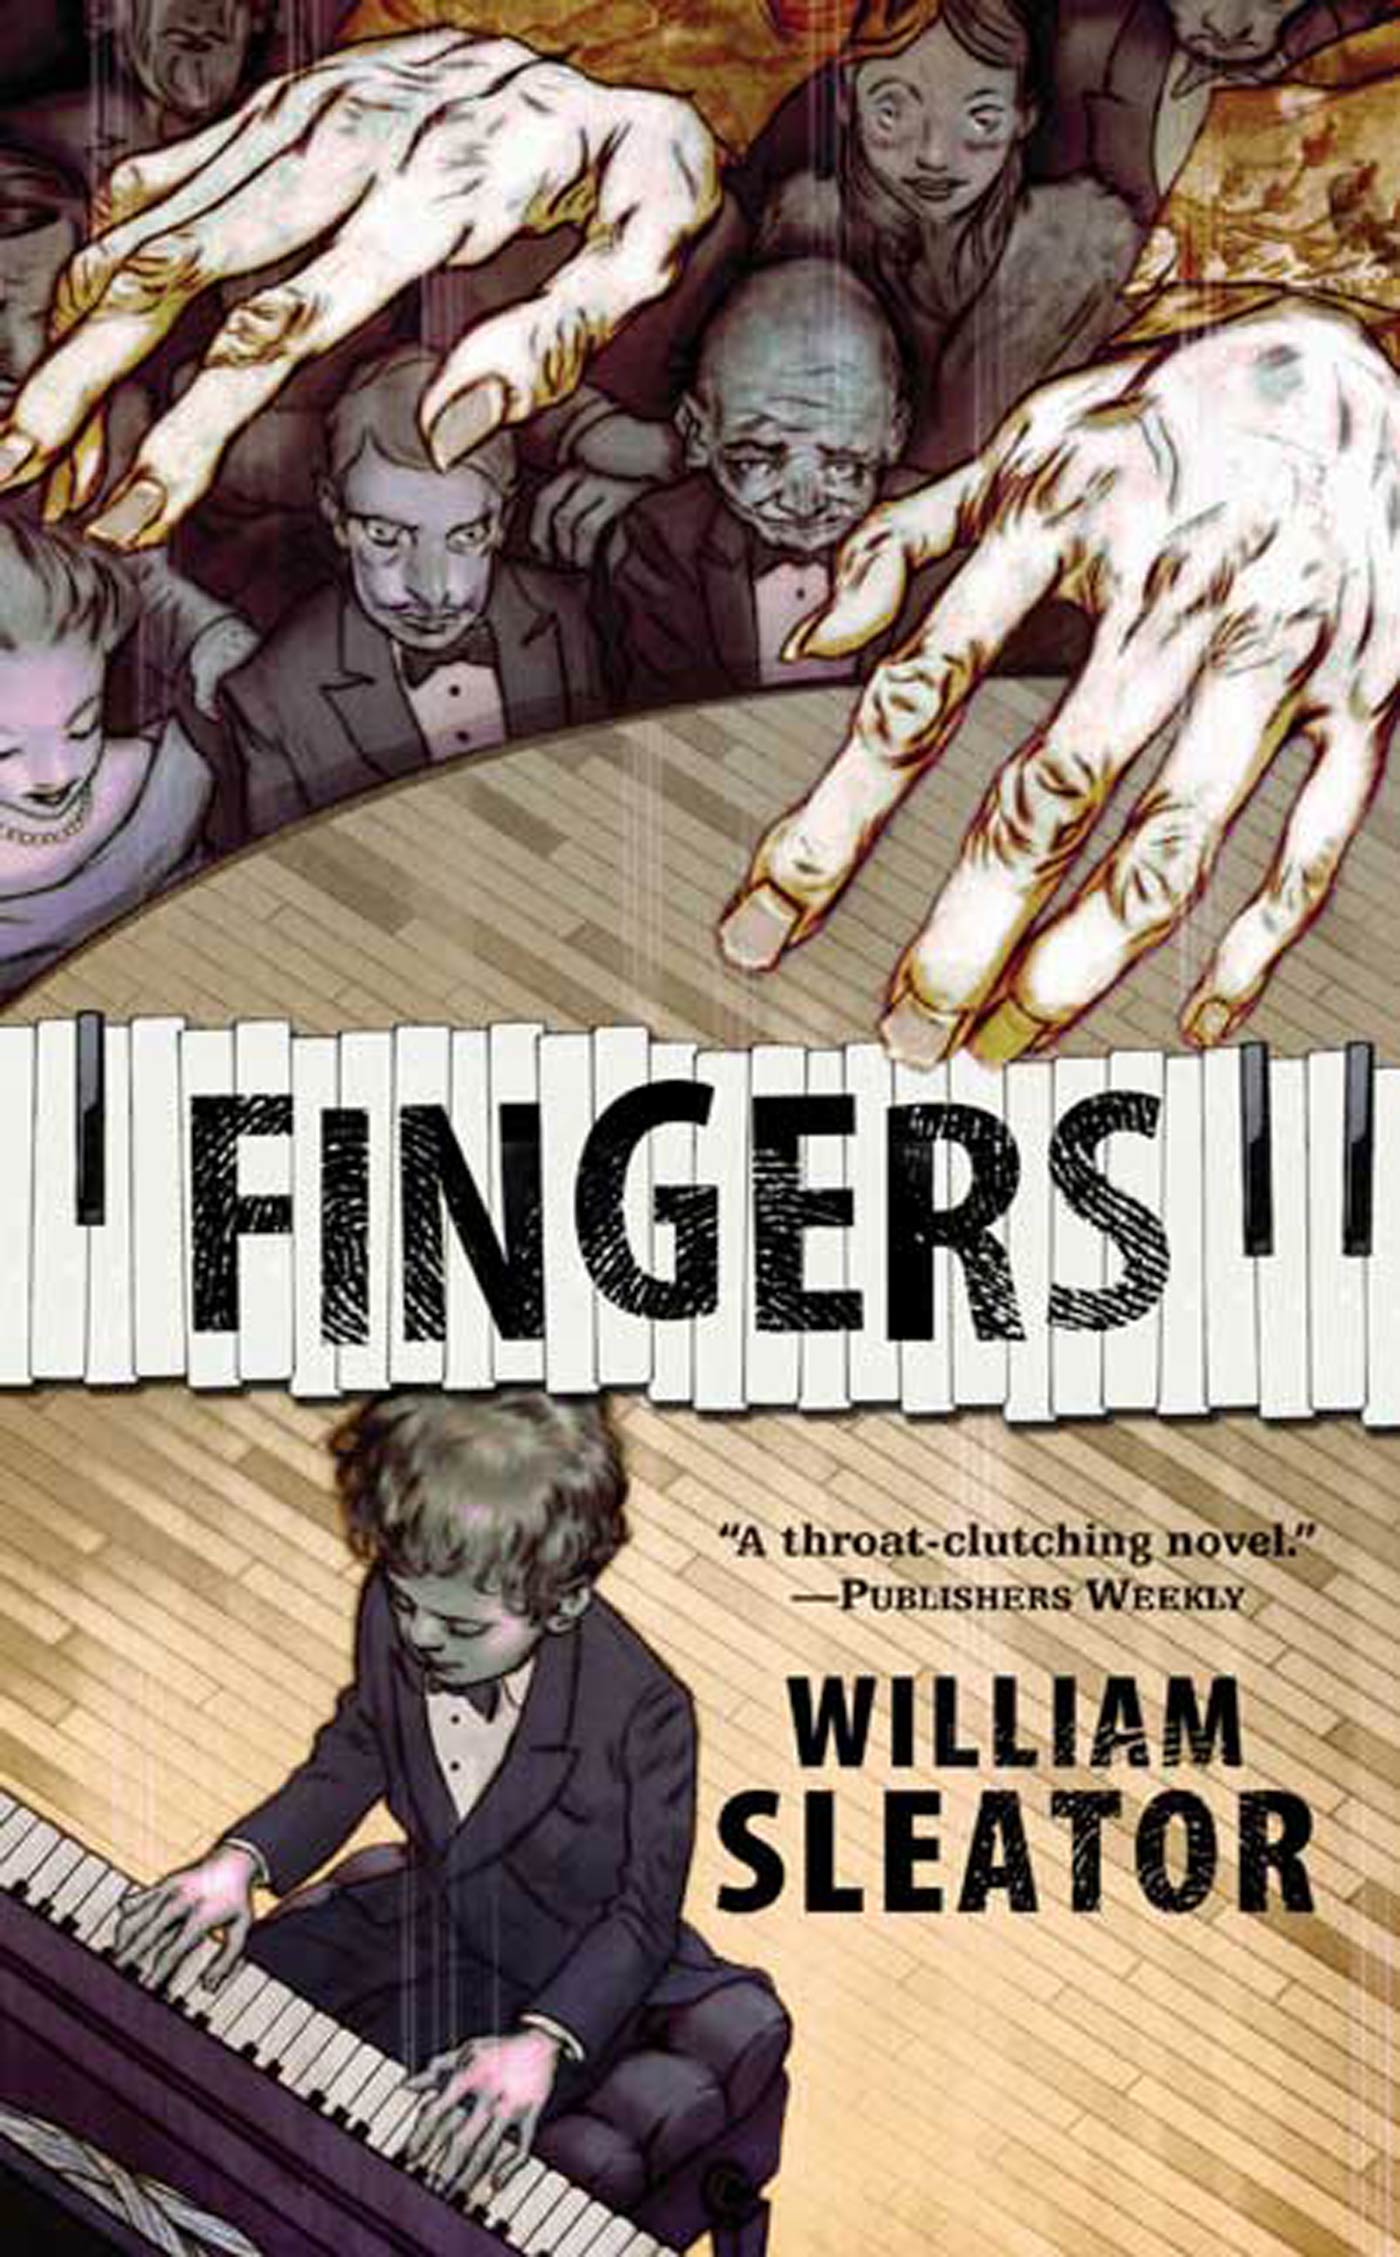 Fingers by William Sleator